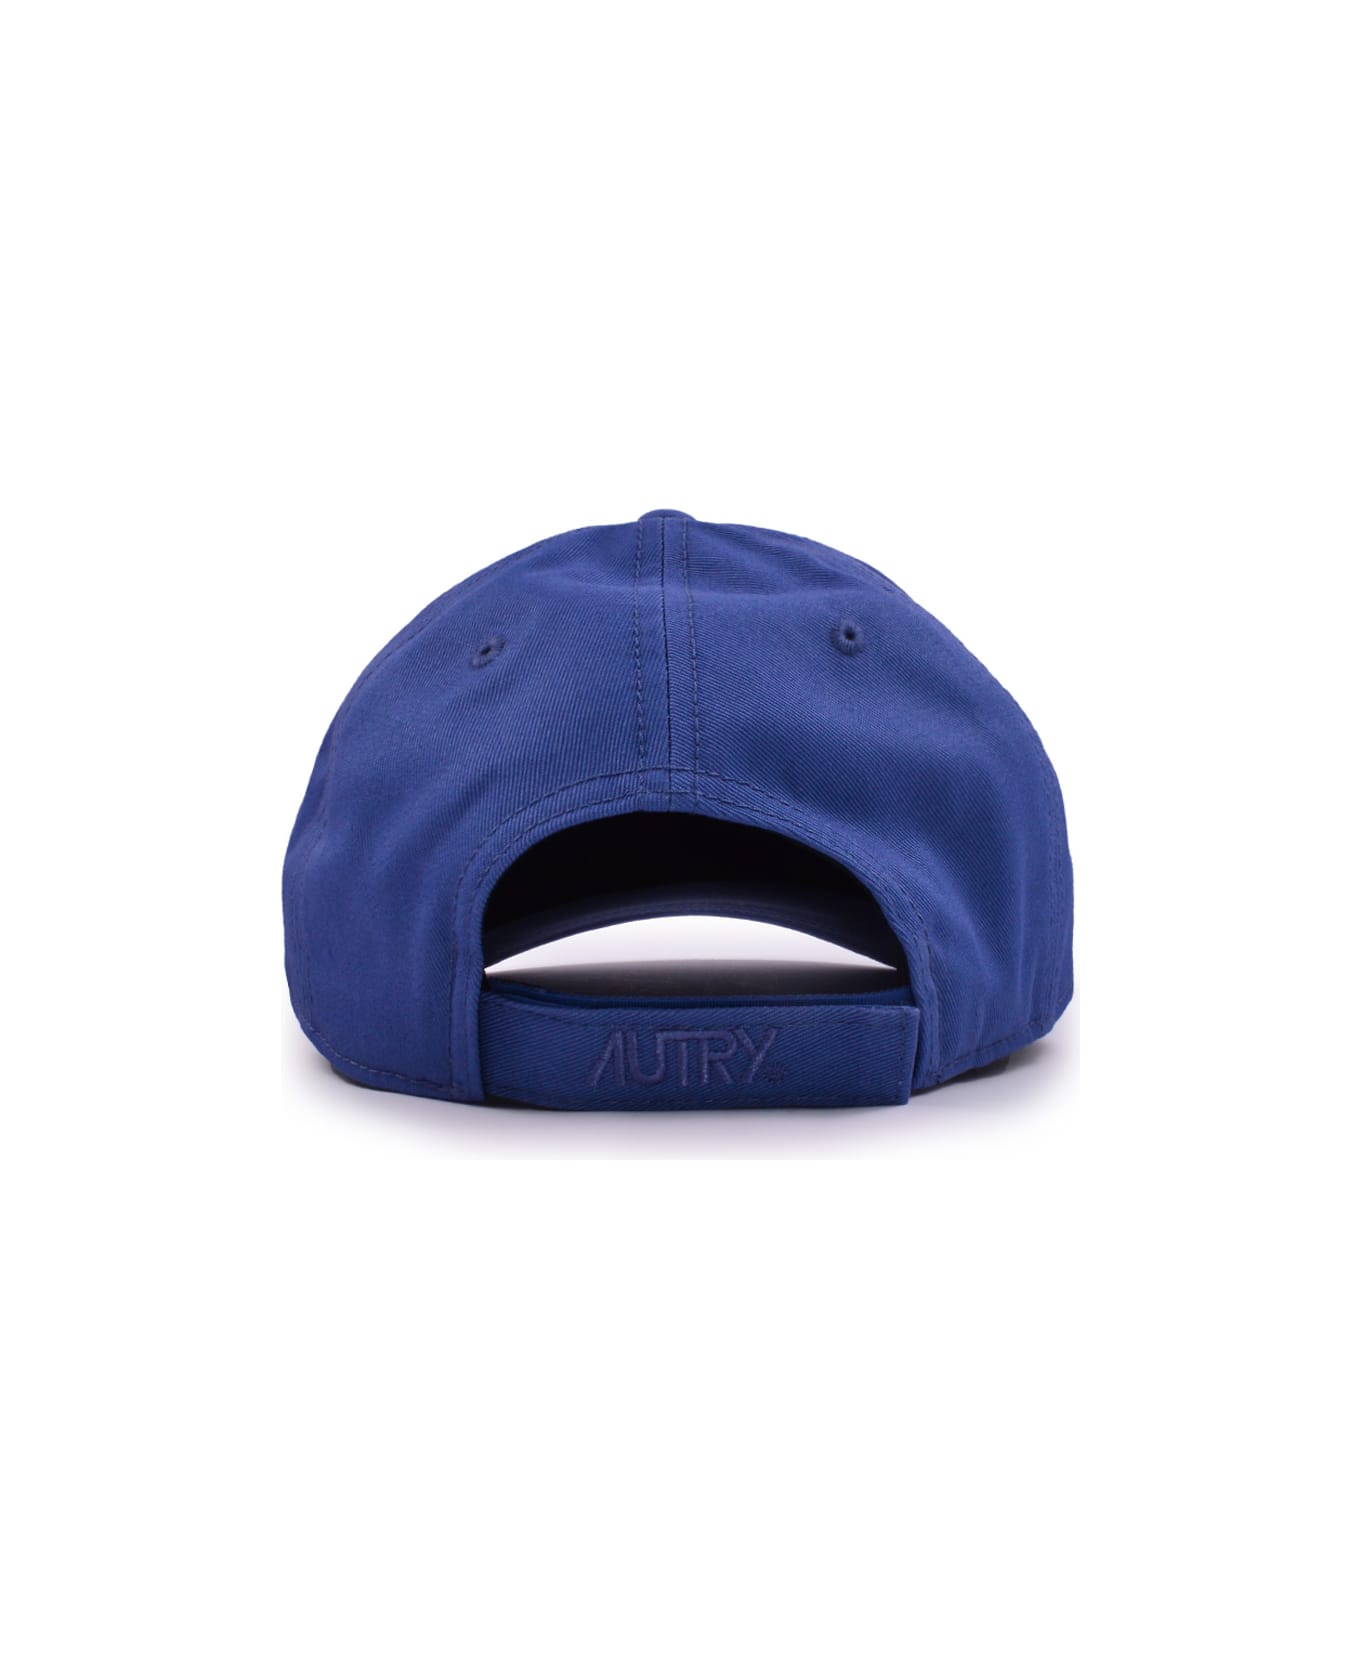 Autry Hats - Clear Blue